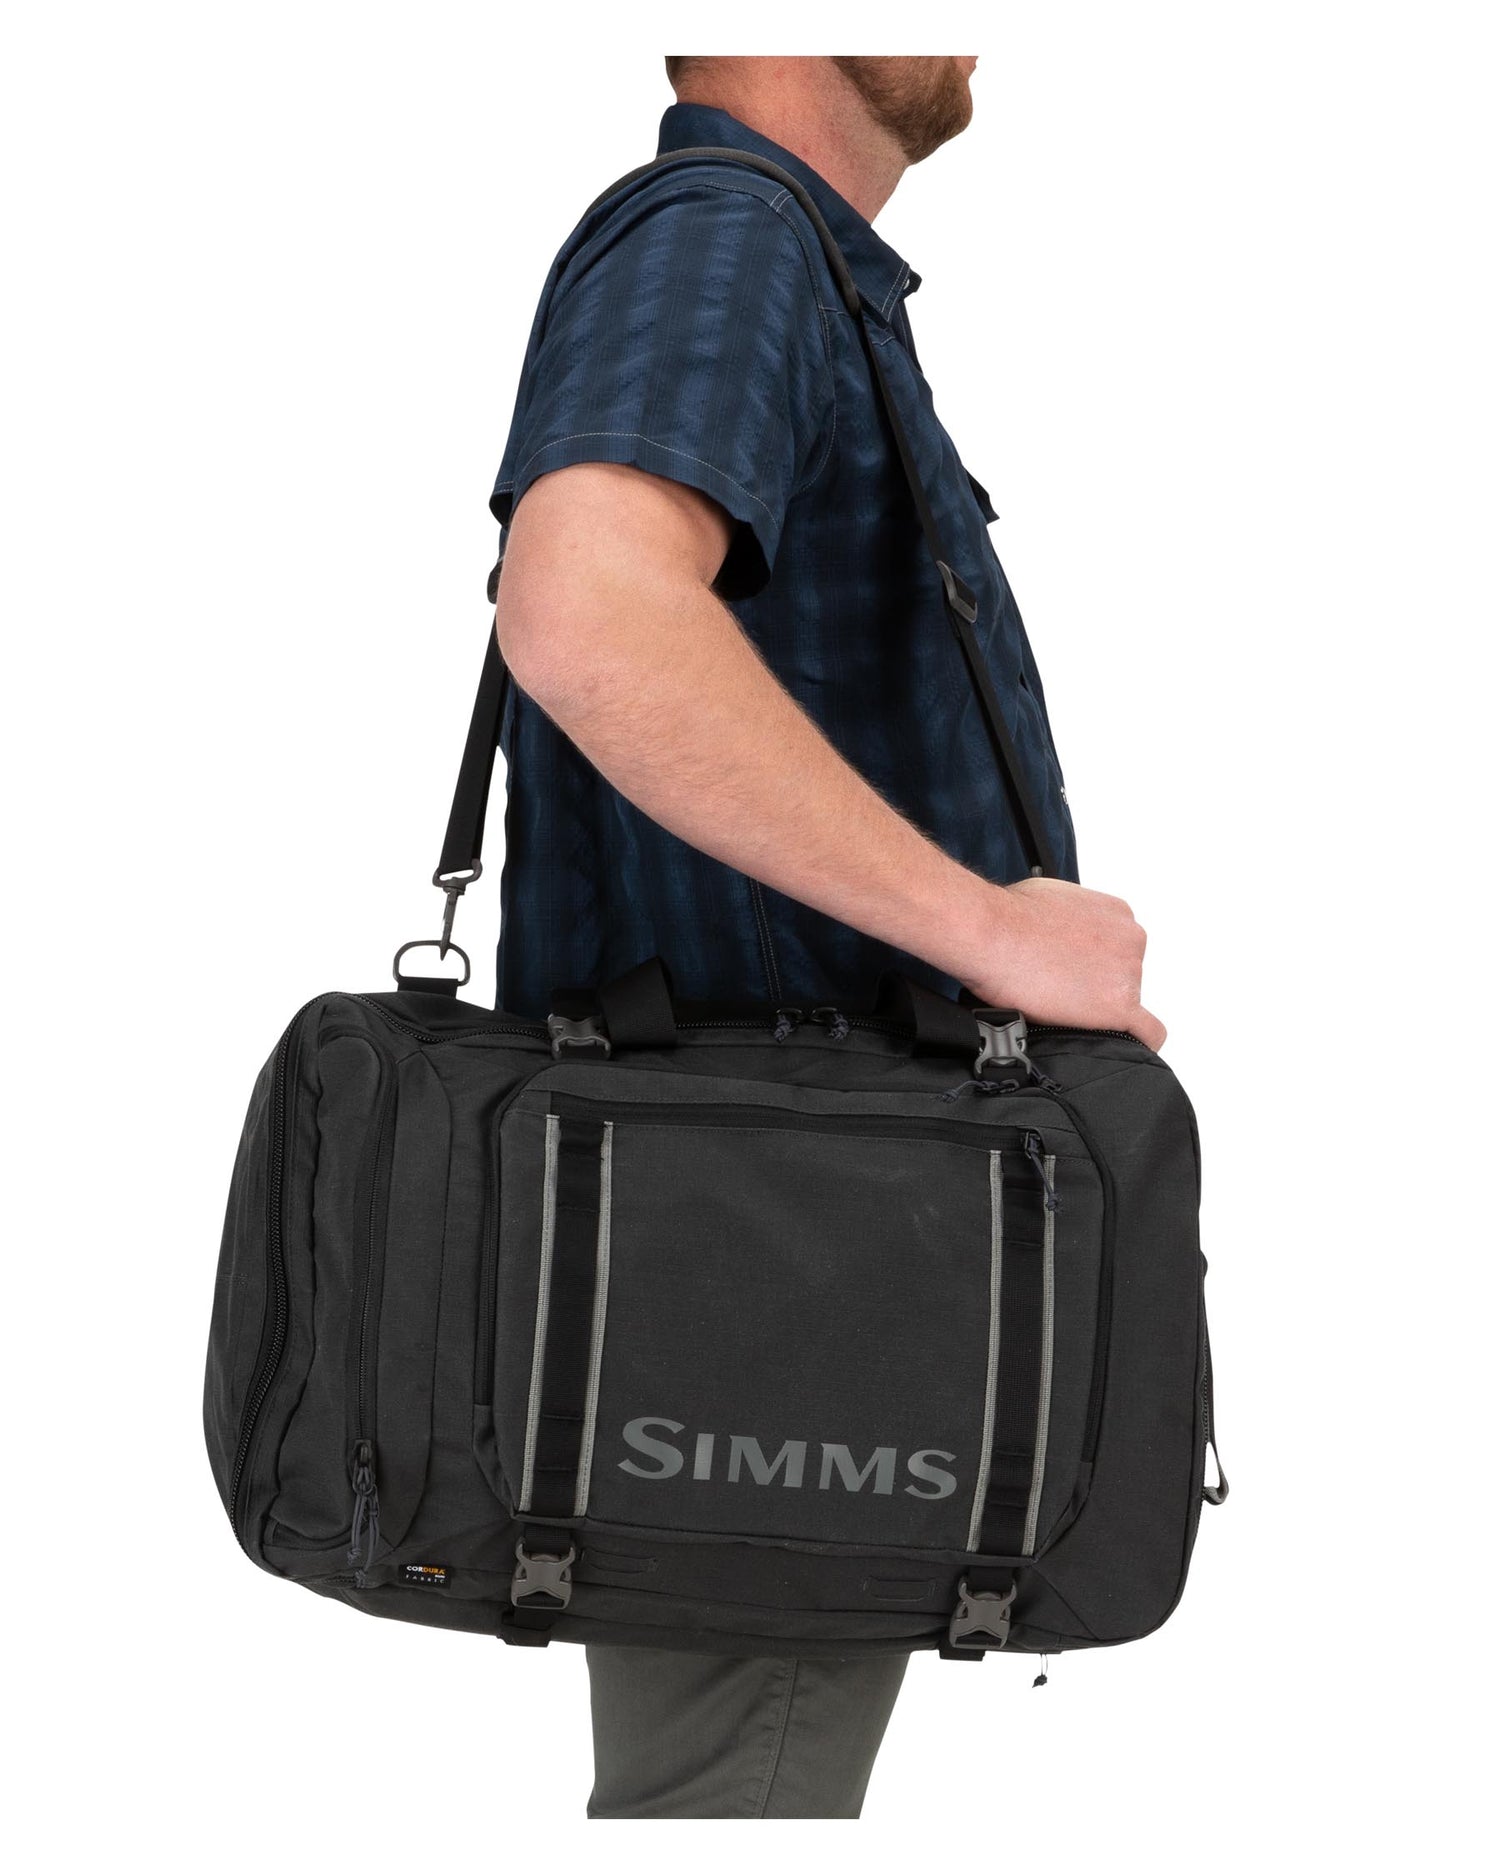 Simms Challenger Mesh Duffel - 60L | Simms Fishing Products